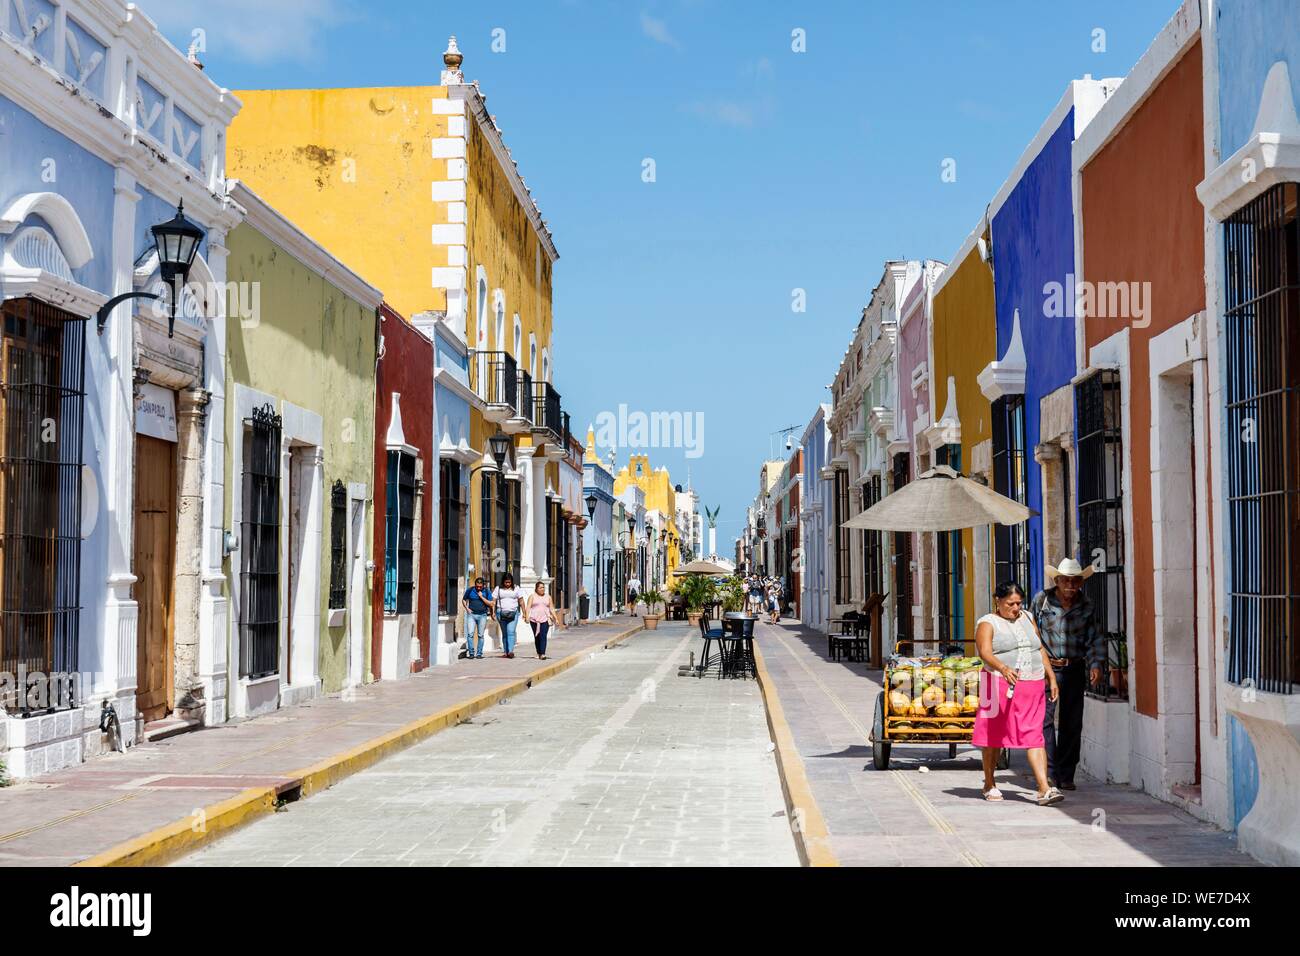 Mexico, Campeche state, Campeche, fortified city listed as World Heritage by UNESCO, calle 59 colonial houses Stock Photo